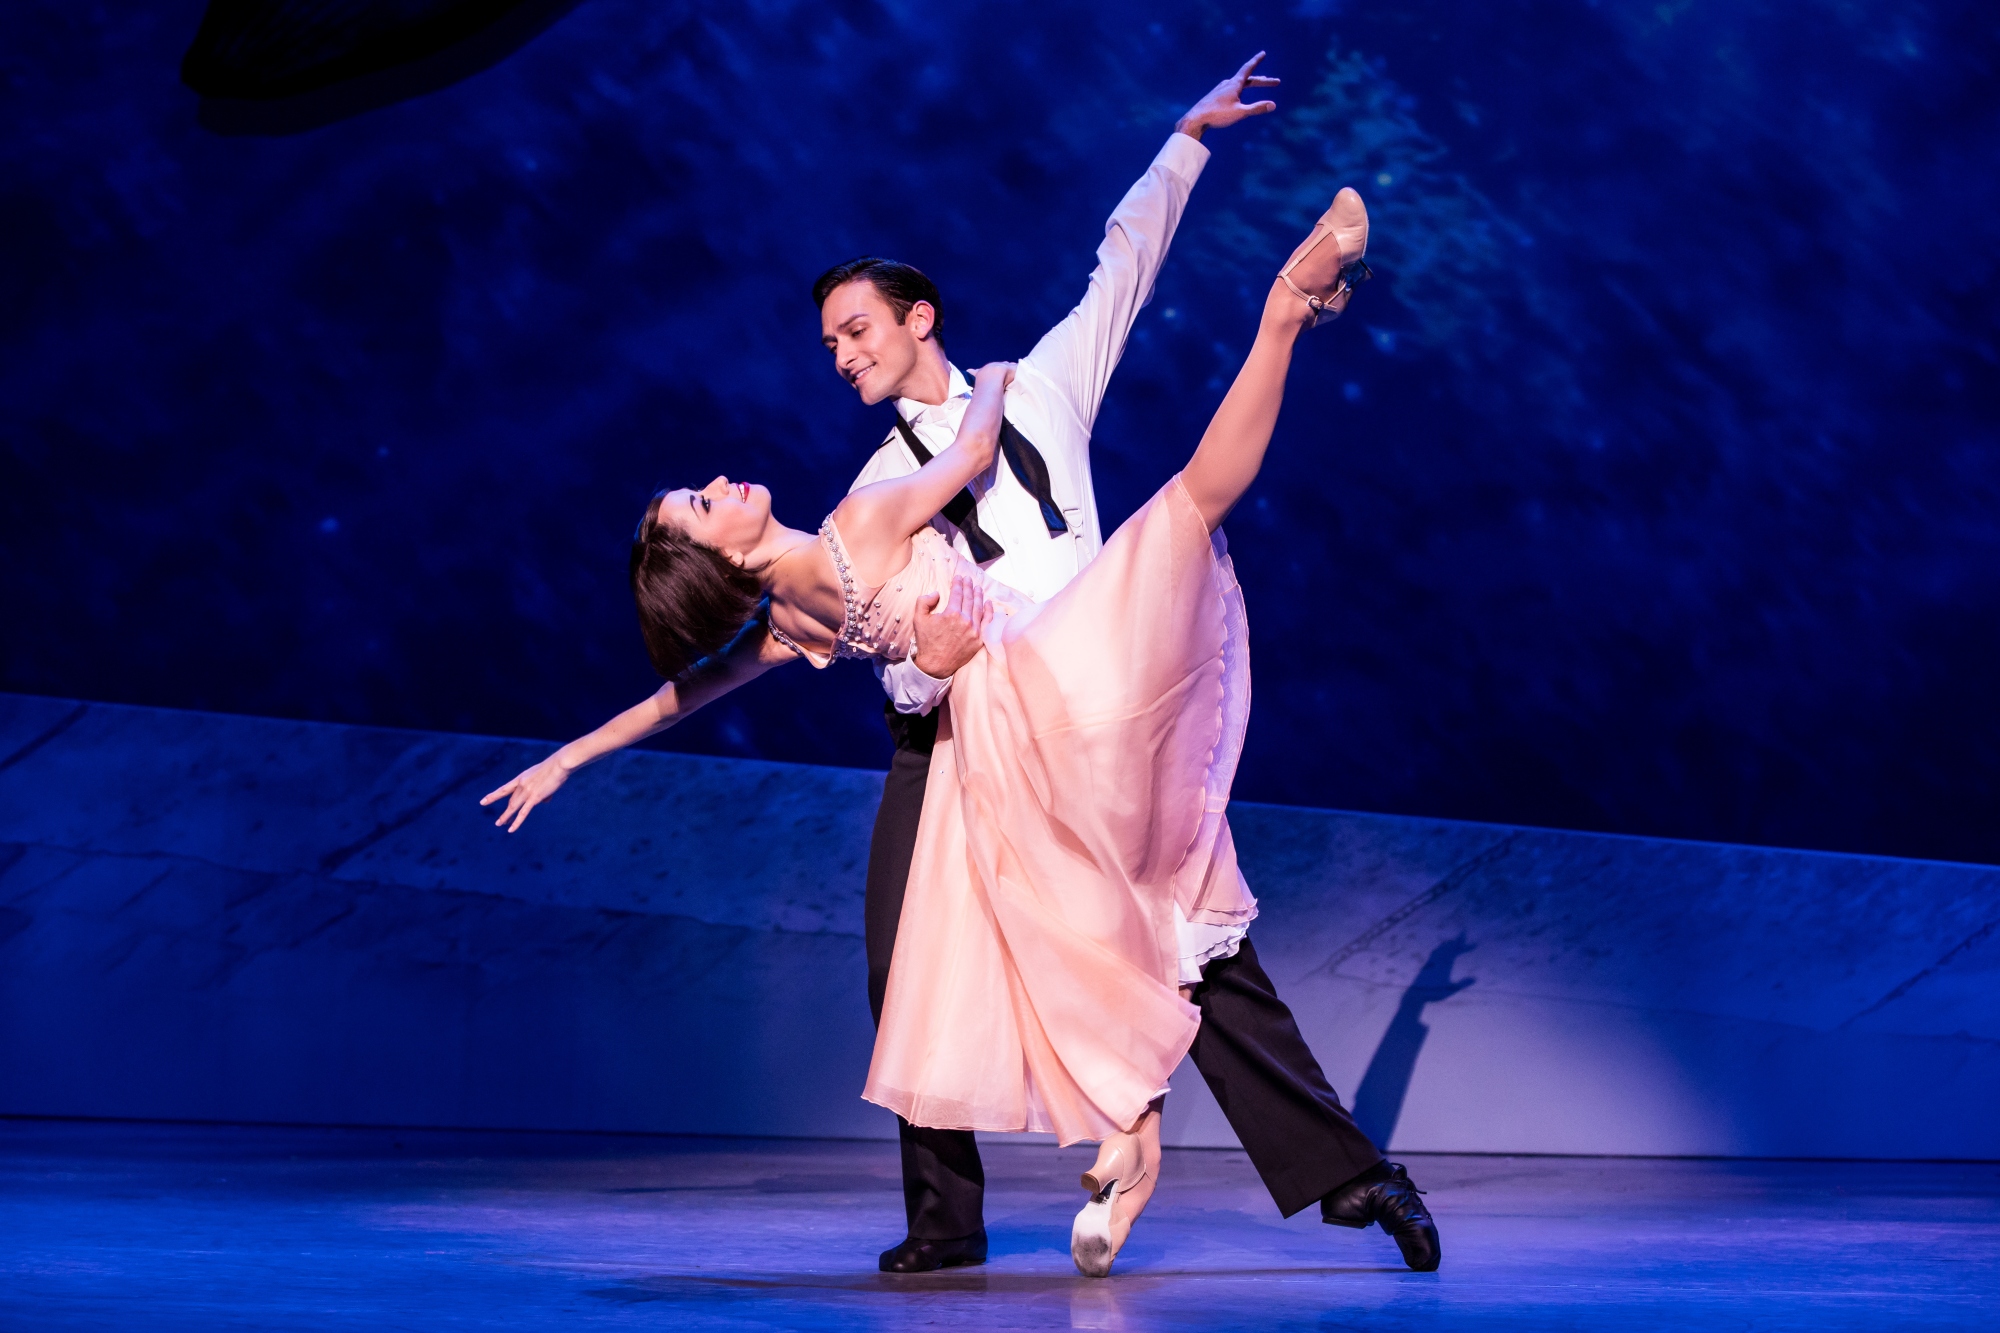 Theater Review: Love is a Three-Way Street for An American in Paris